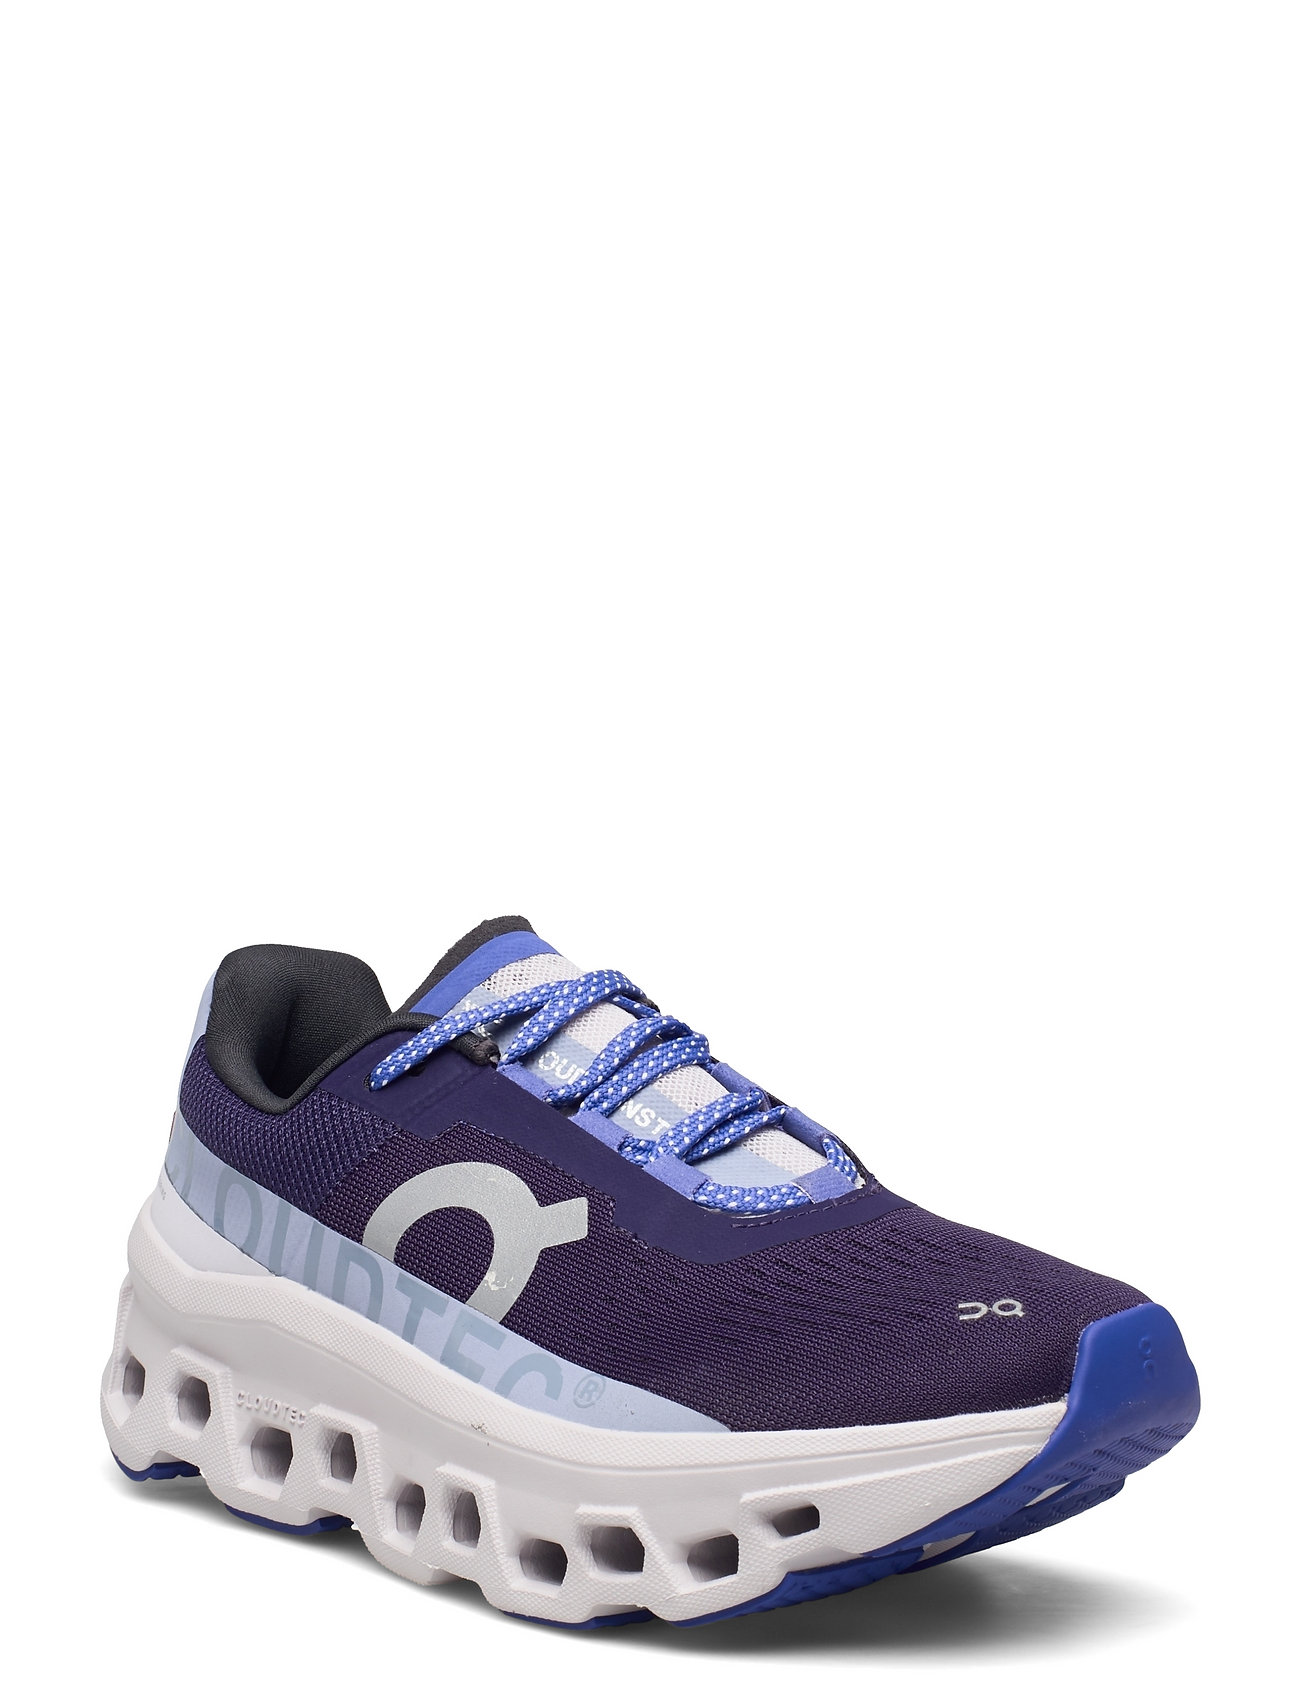 Cloudmonster Shoes Sport Shoes Running Shoes Blå On